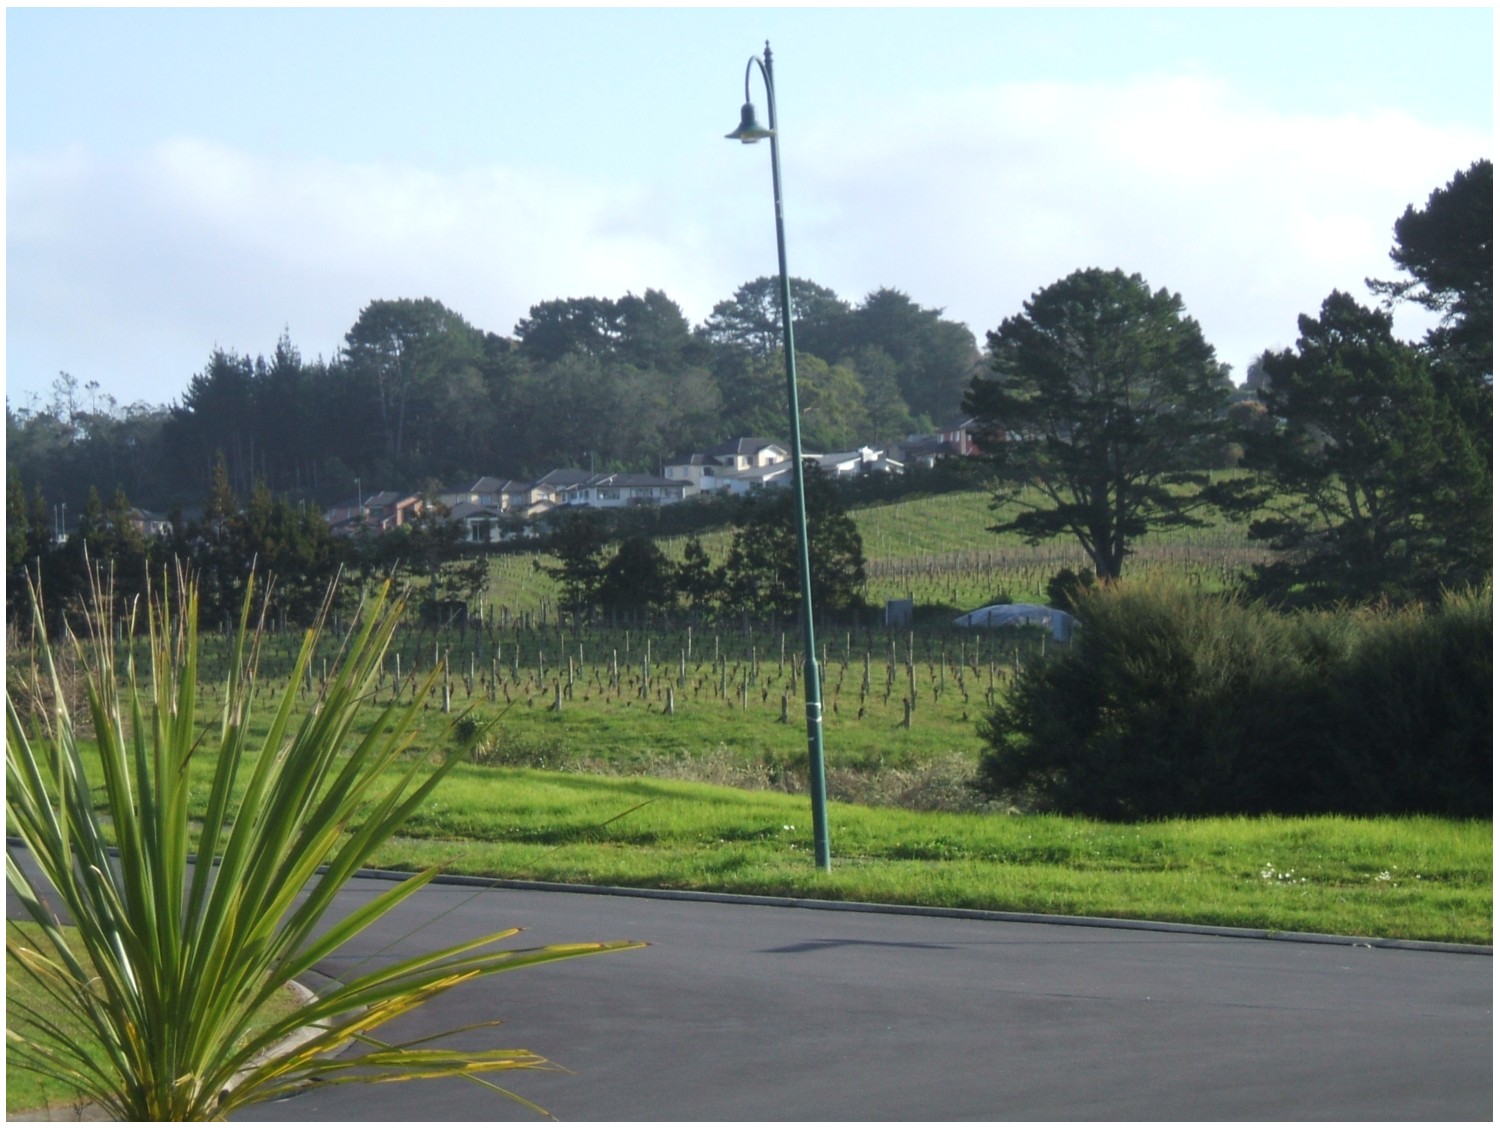 The vineyard in our valley, 2011